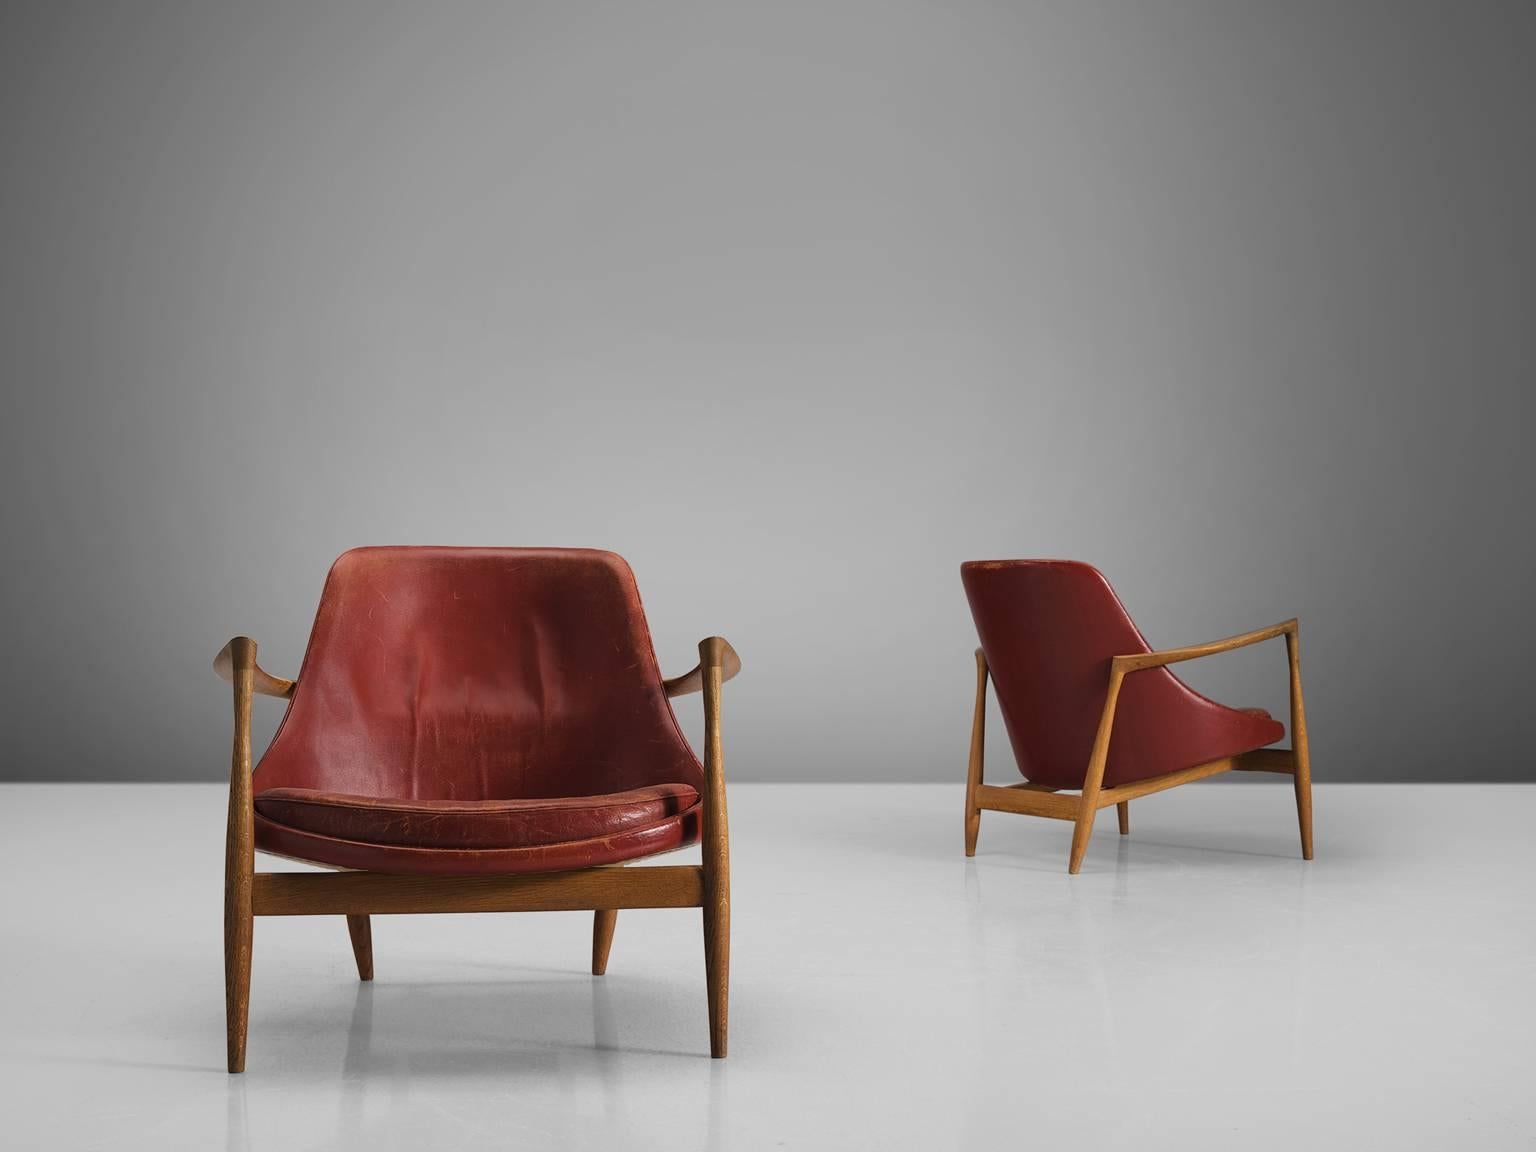 Two lounge chairs, model U-56 'Elizabeth', in oak and leather, by Ib Kofod-Larsen, Denmark, 1956. 

These are two of Kofod-Larsen highest-quality armchairs, with an oak frame and beautiful details in the design. The leather holds beautiful original